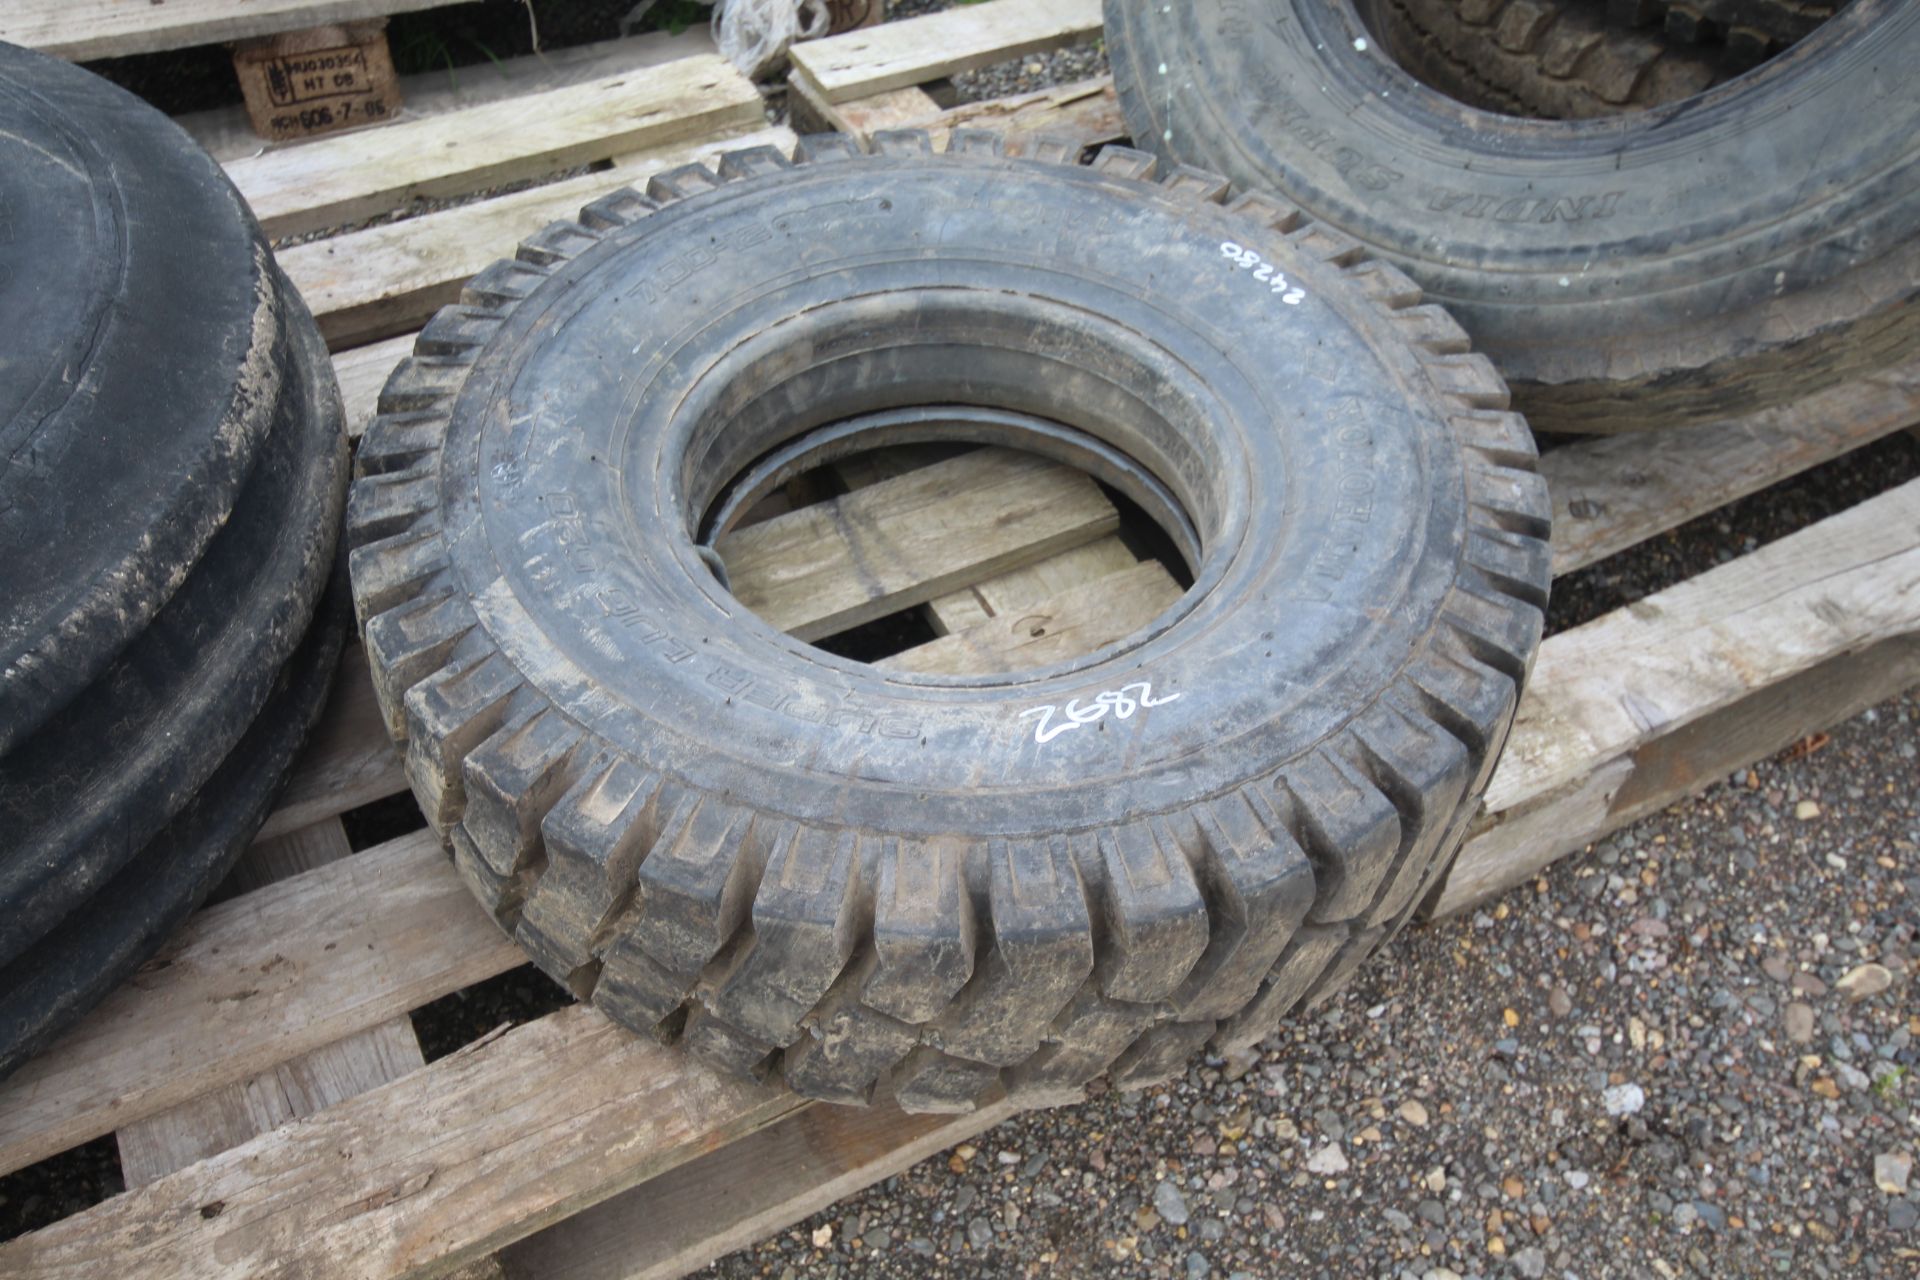 700x12 forklift tyre @ 100%.